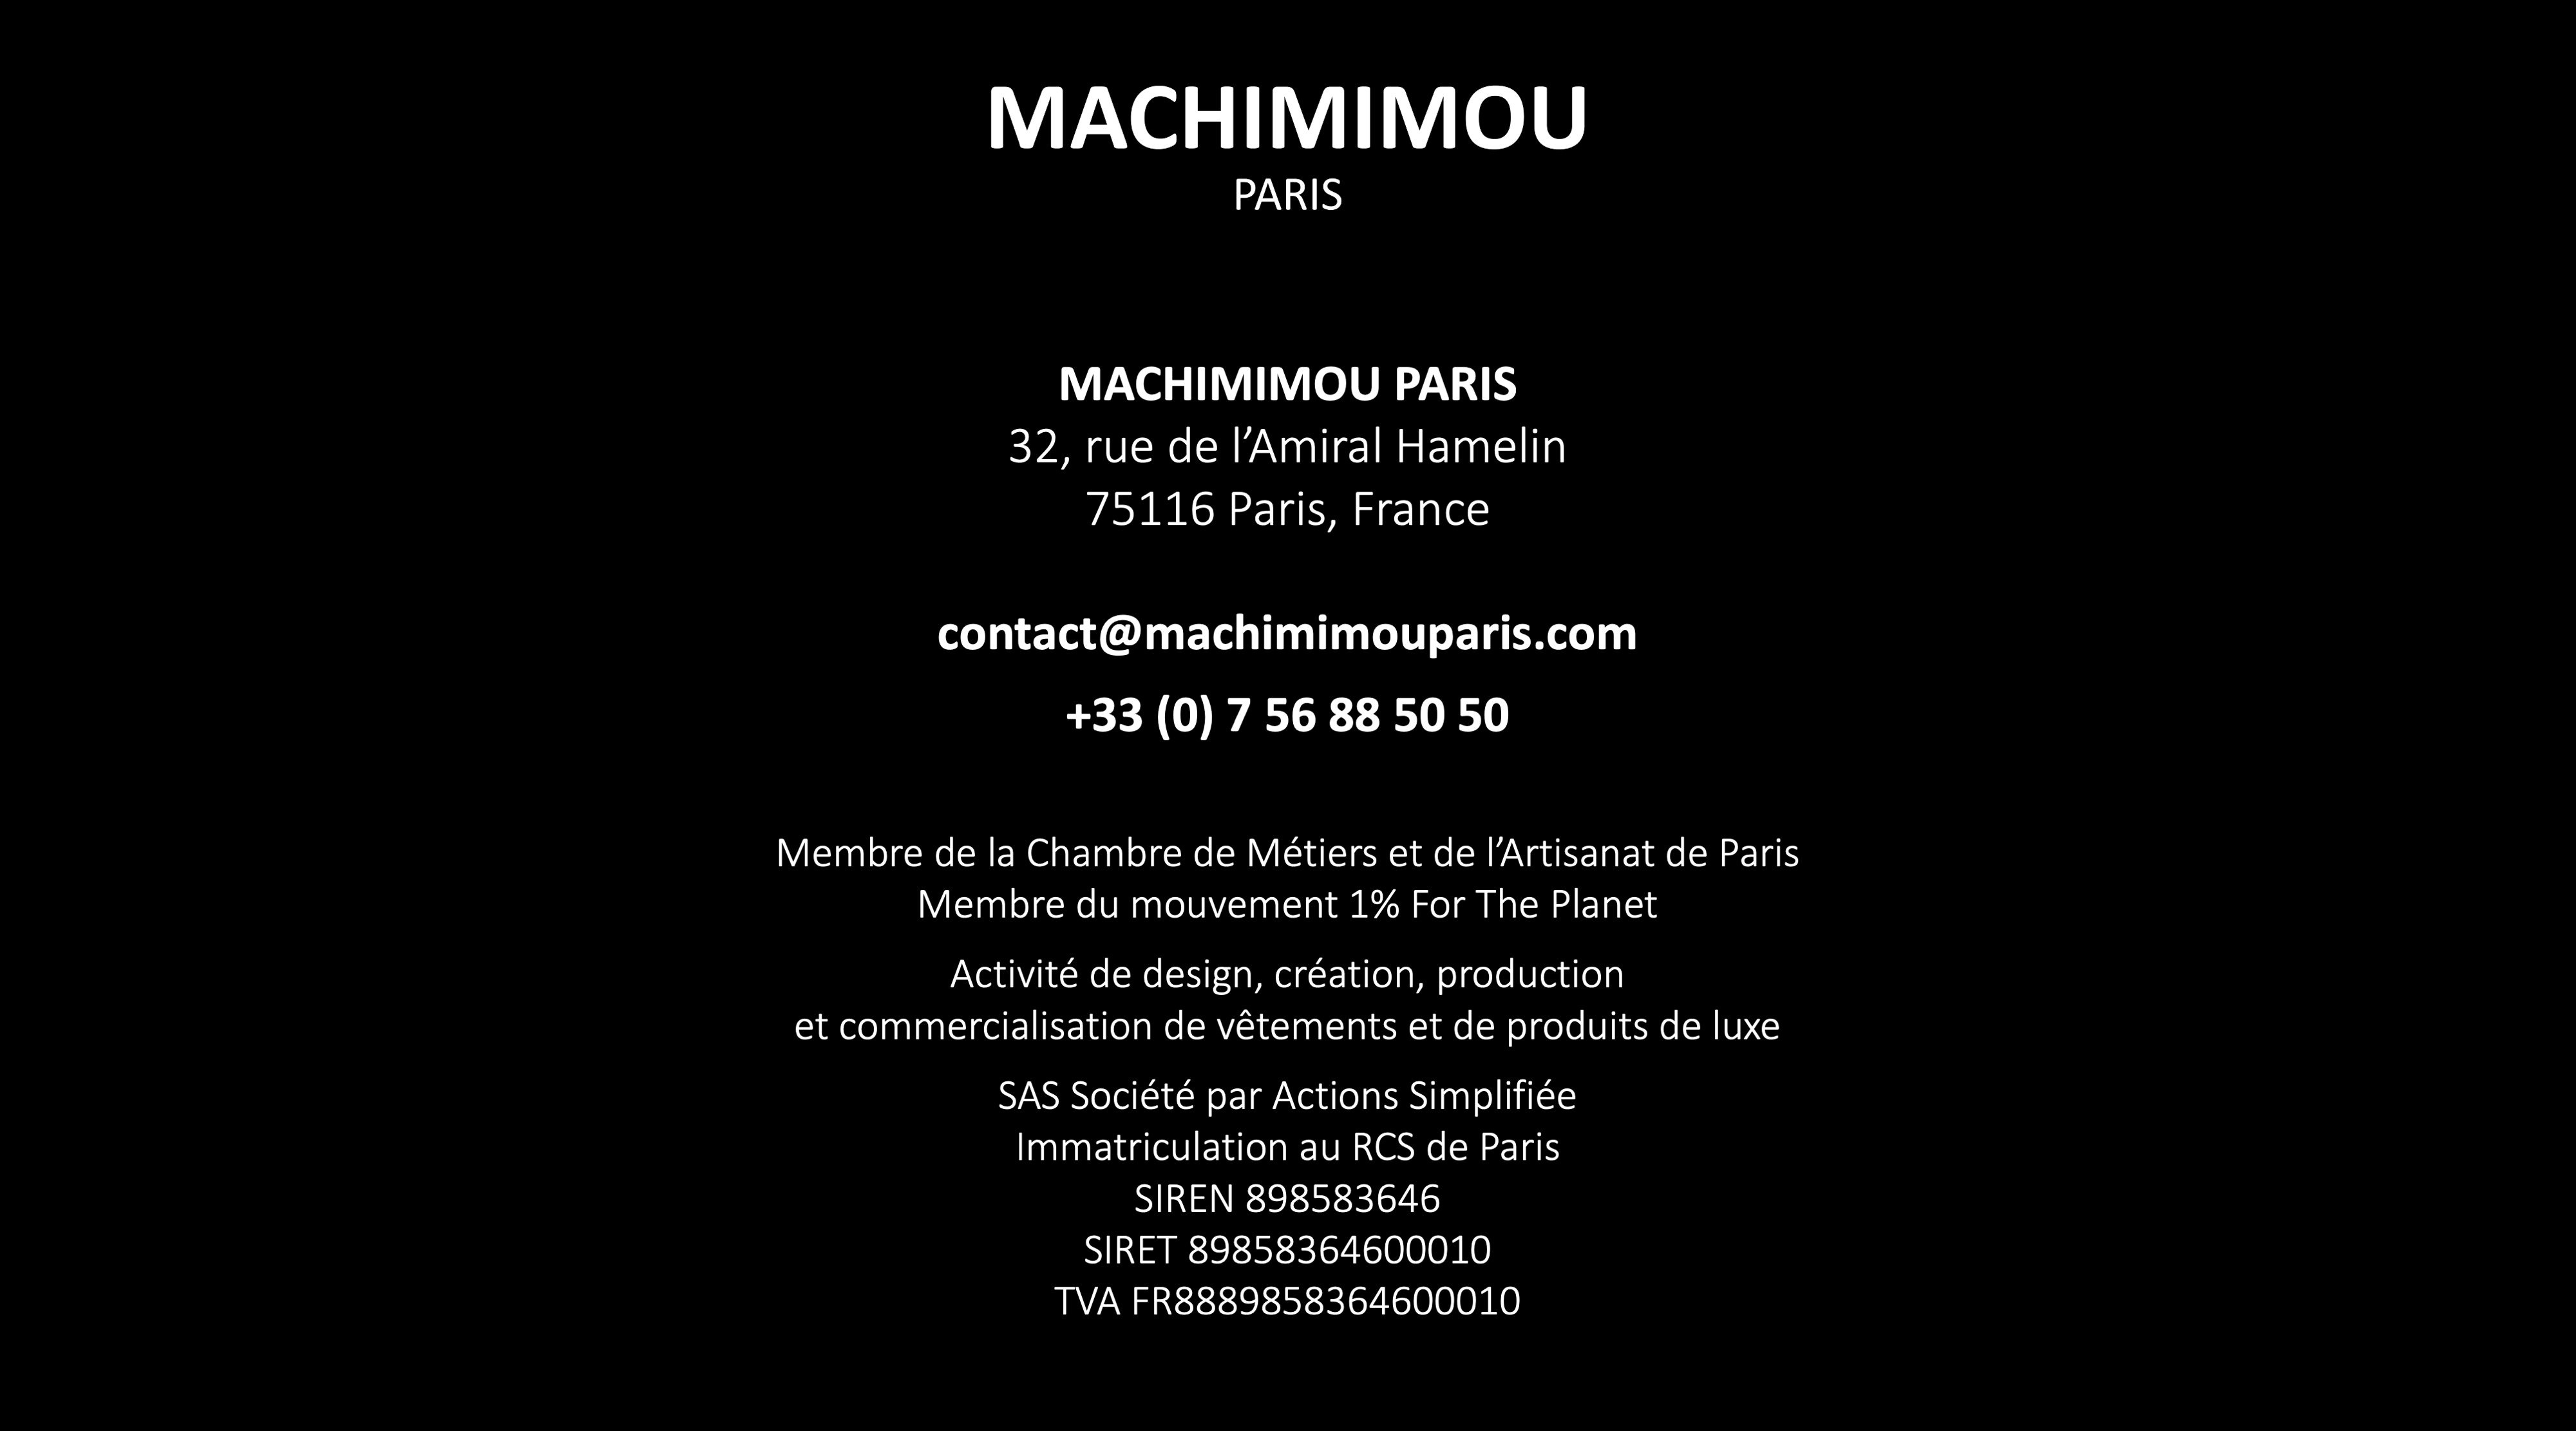 MACHIMIMOU PARIS - Contact Us for Tailor-Made Experience